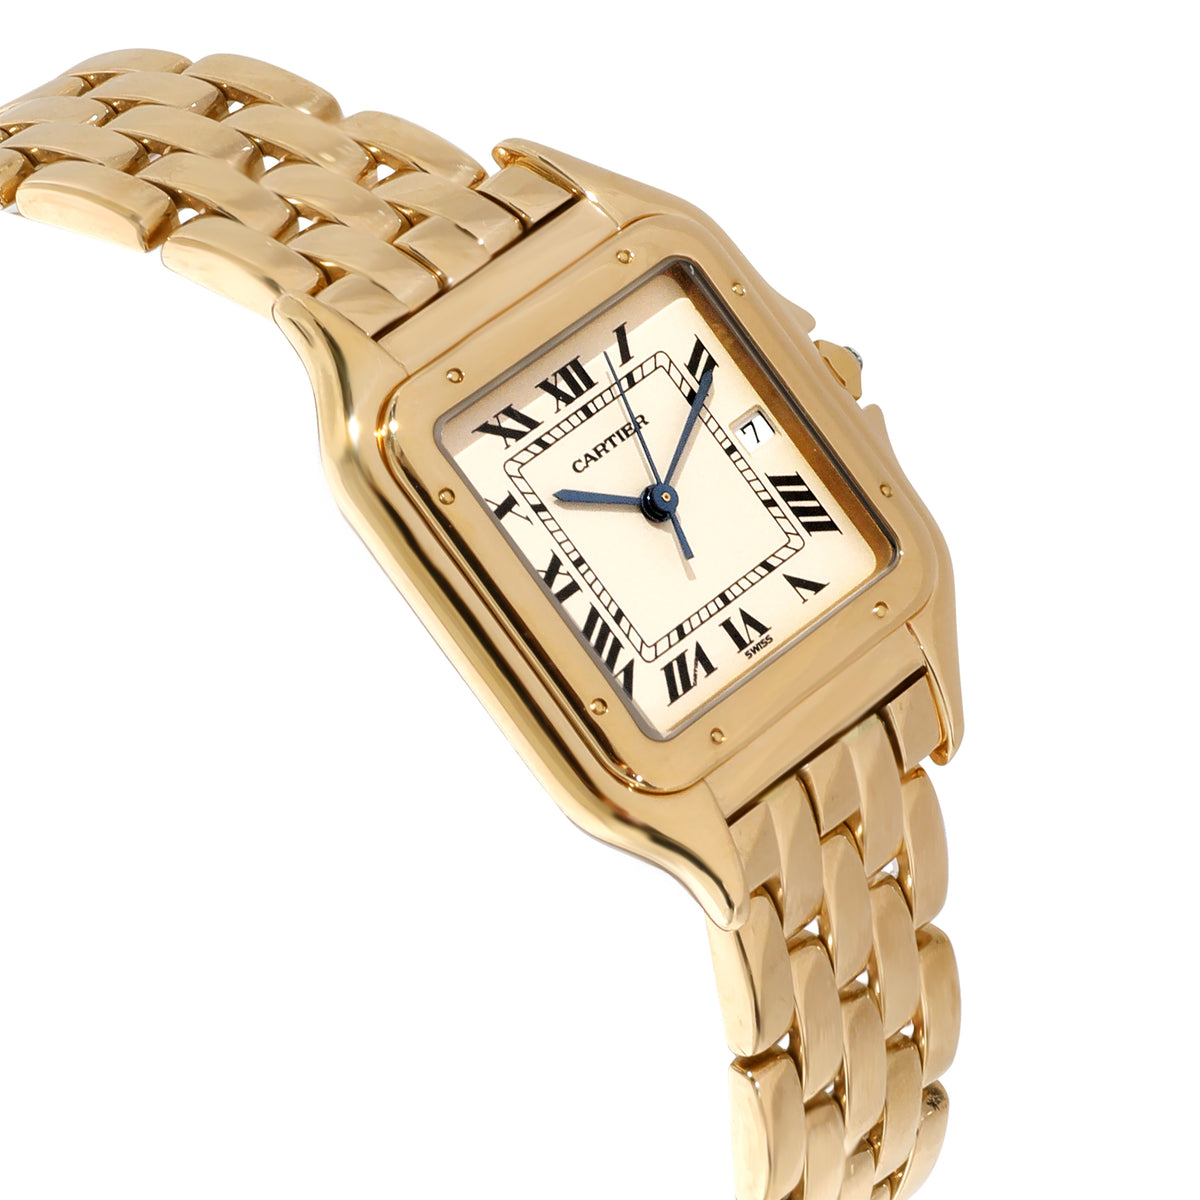 Cartier Panthere 883968 Unisex Watch in 18kt Yellow Gold